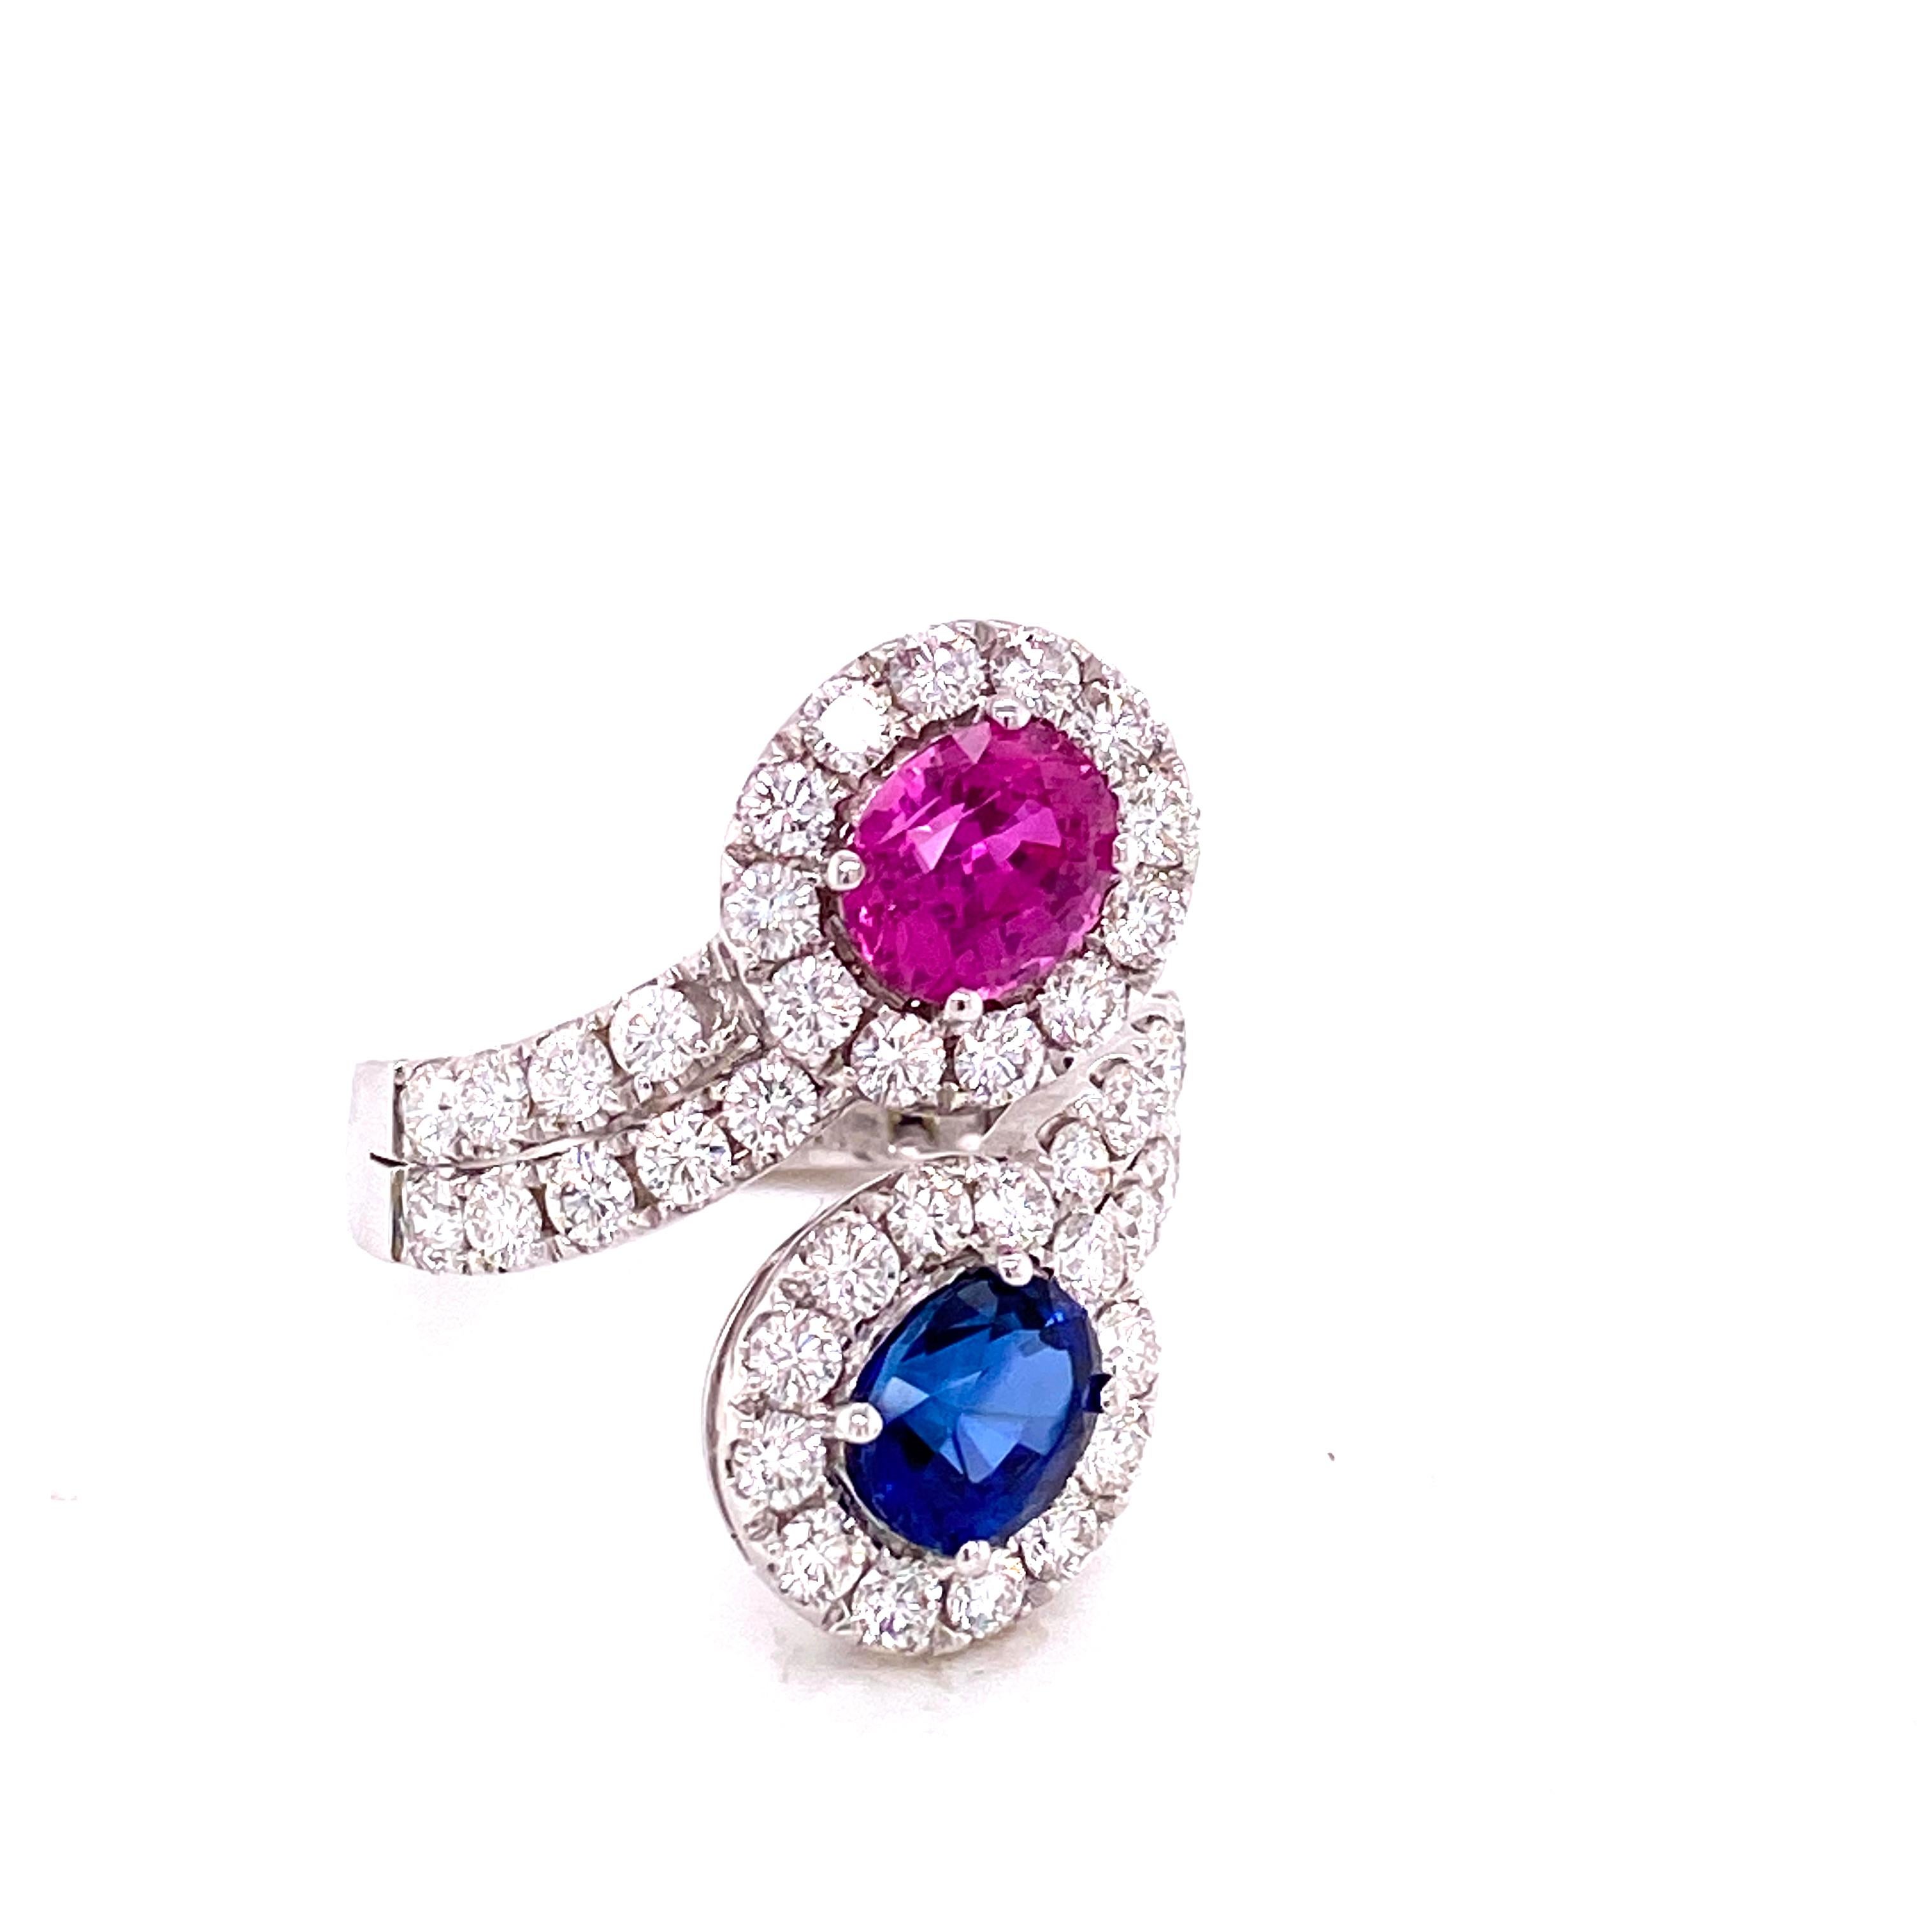 GRS Certified 1.59 Carat Blue Sapphire and 1.54 Carat Pink Sapphire Diamond Ring:

A unique twin ring, it features two gorgeous GRS certified Royal Blue and pink sapphires weighing 1.59 carat and 1.54 carat respectively, accentuated by white round